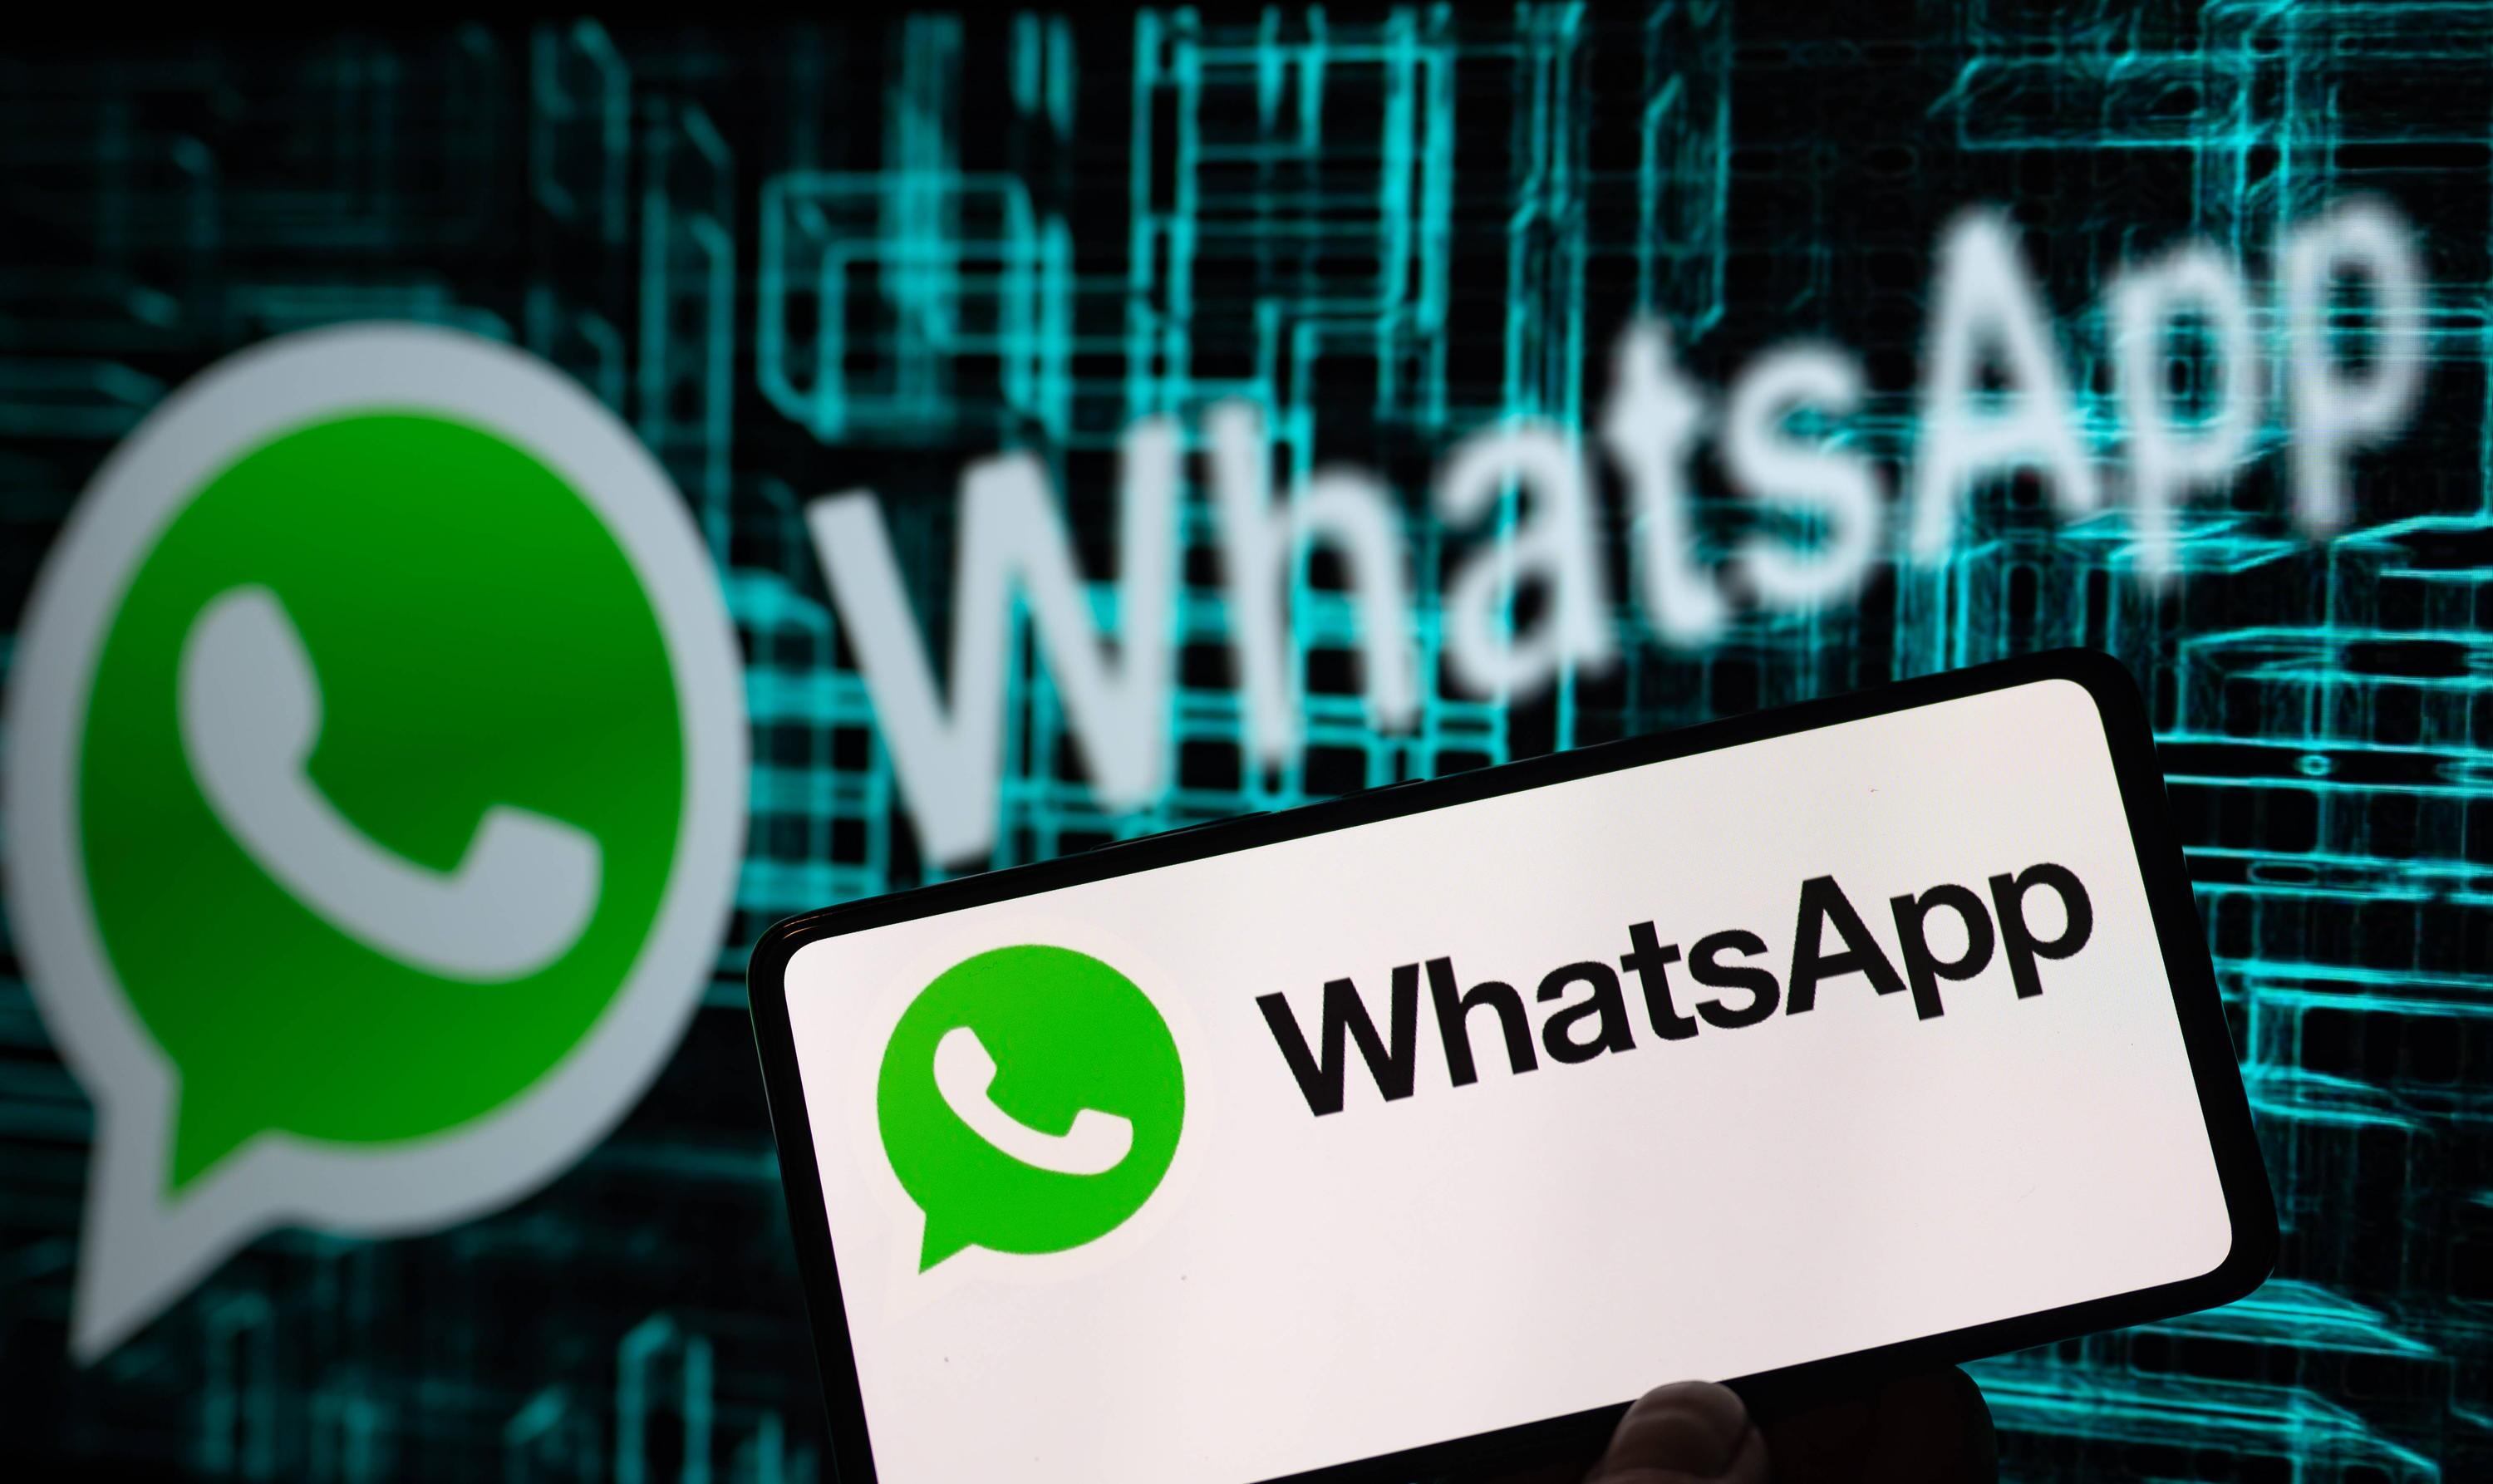 How do you use WhatsApp to find customers